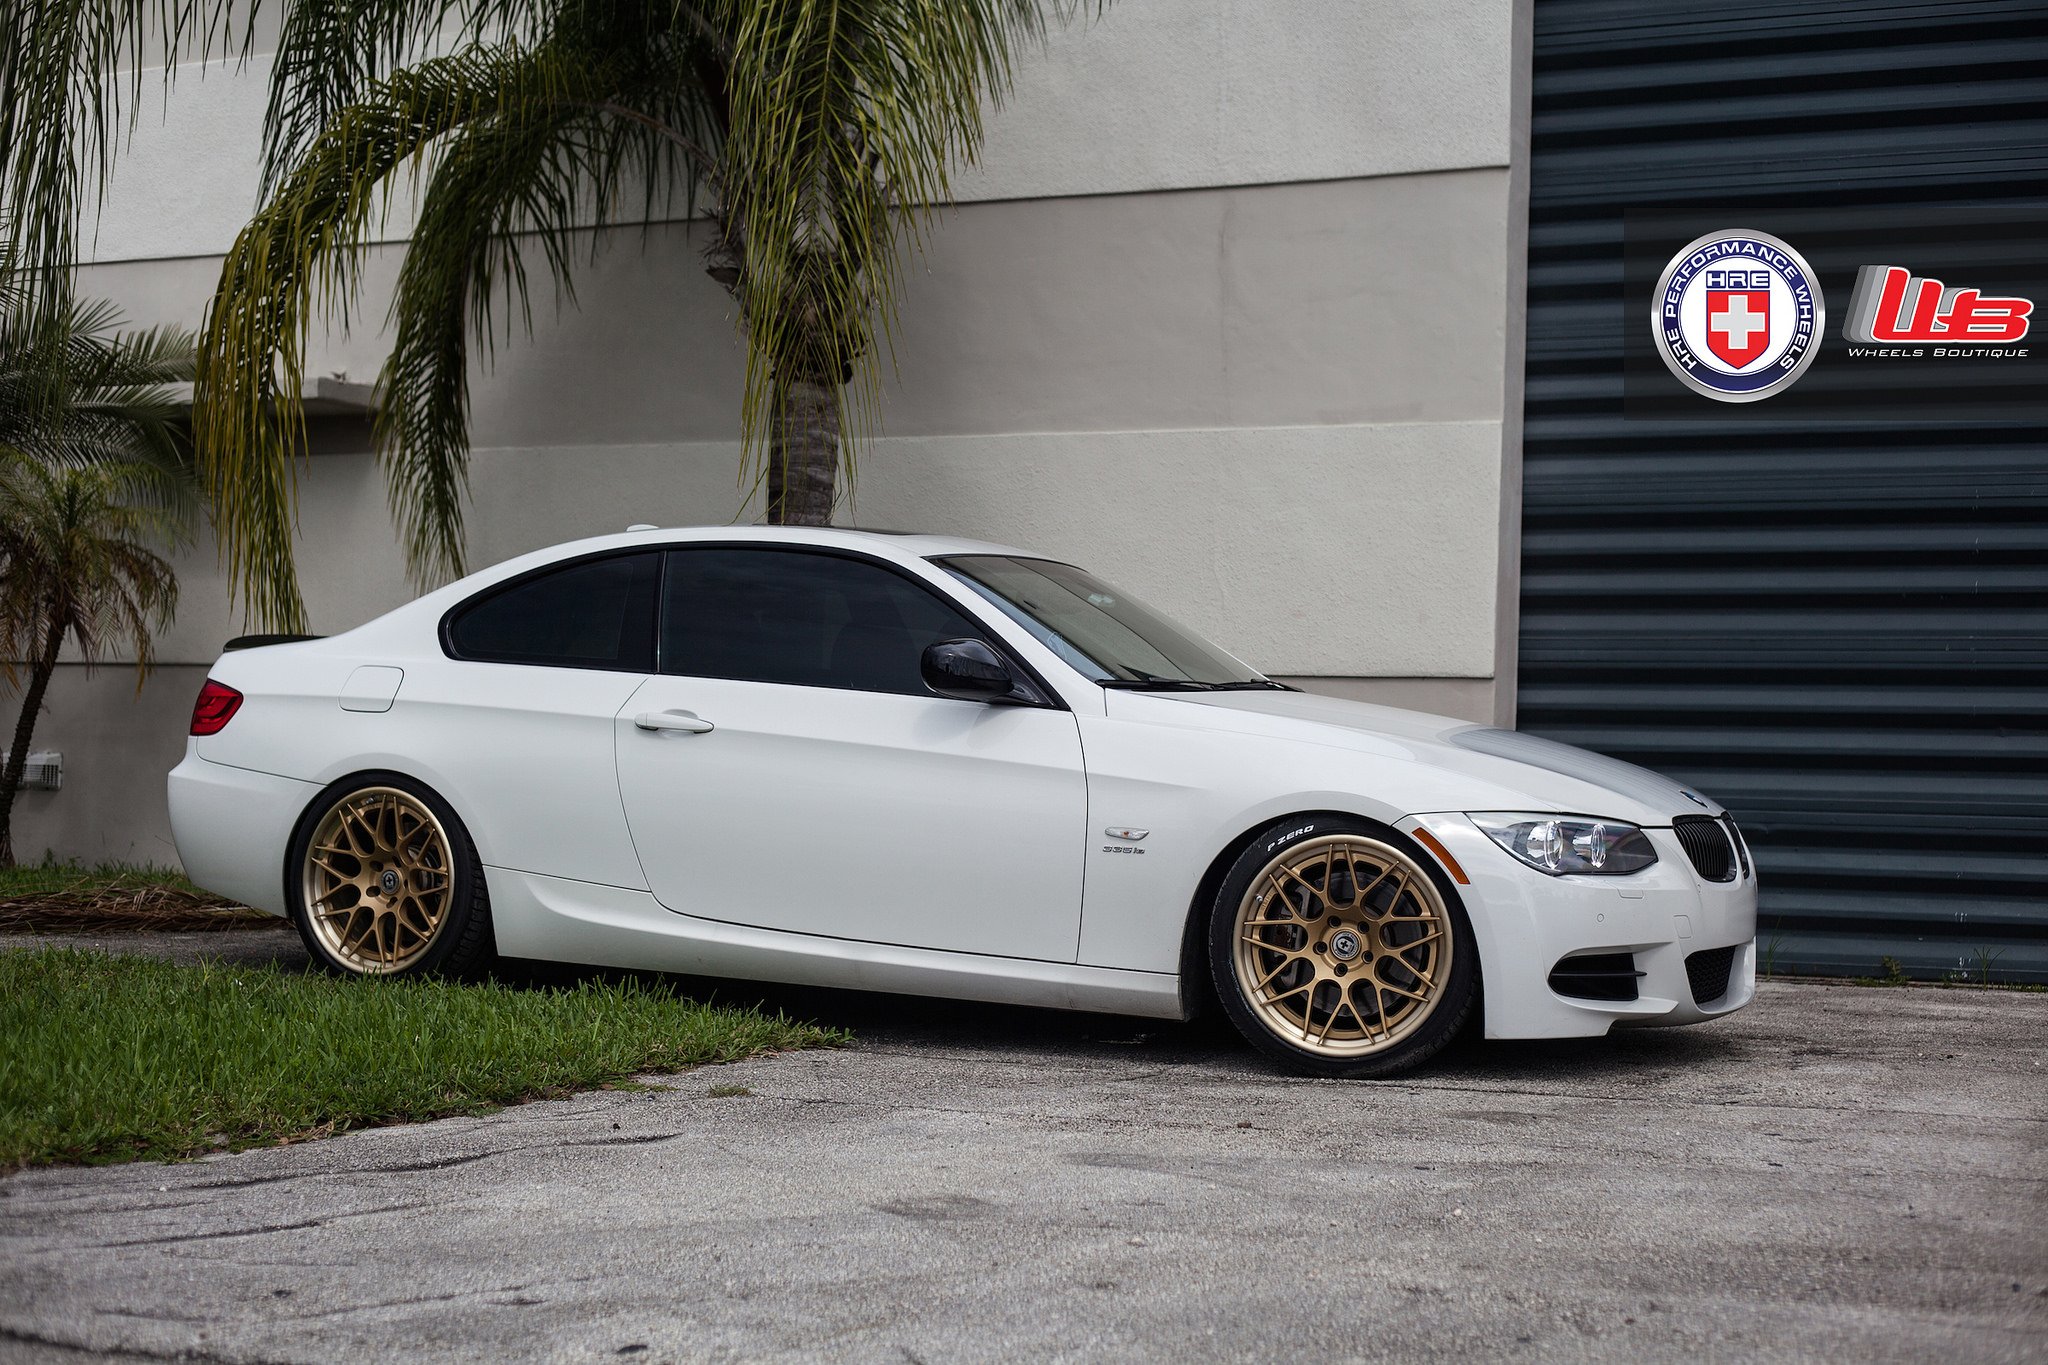 bmw, 335i, Coupe, Hre, Wheels, Tuning, Cars Wallpaper